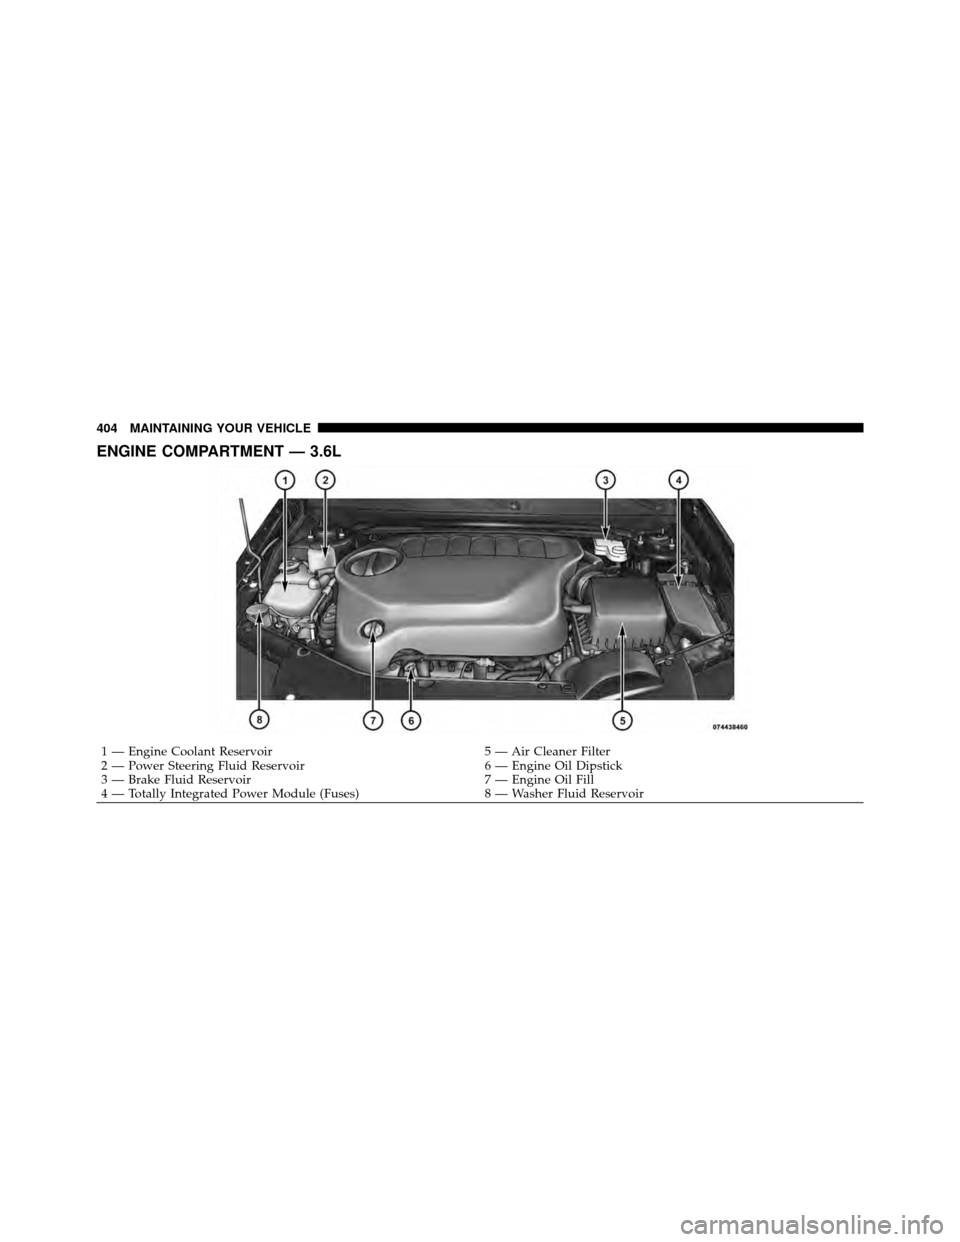 CHRYSLER 200 CONVERTIBLE 2011 1.G Owners Manual ENGINE COMPARTMENT — 3.6L
1 — Engine Coolant Reservoir5 — Air Cleaner Filter
2 — Power Steering Fluid Reservoir 6 — Engine Oil Dipstick
3 — Brake Fluid Reservoir 7 — Engine Oil Fill
4 �